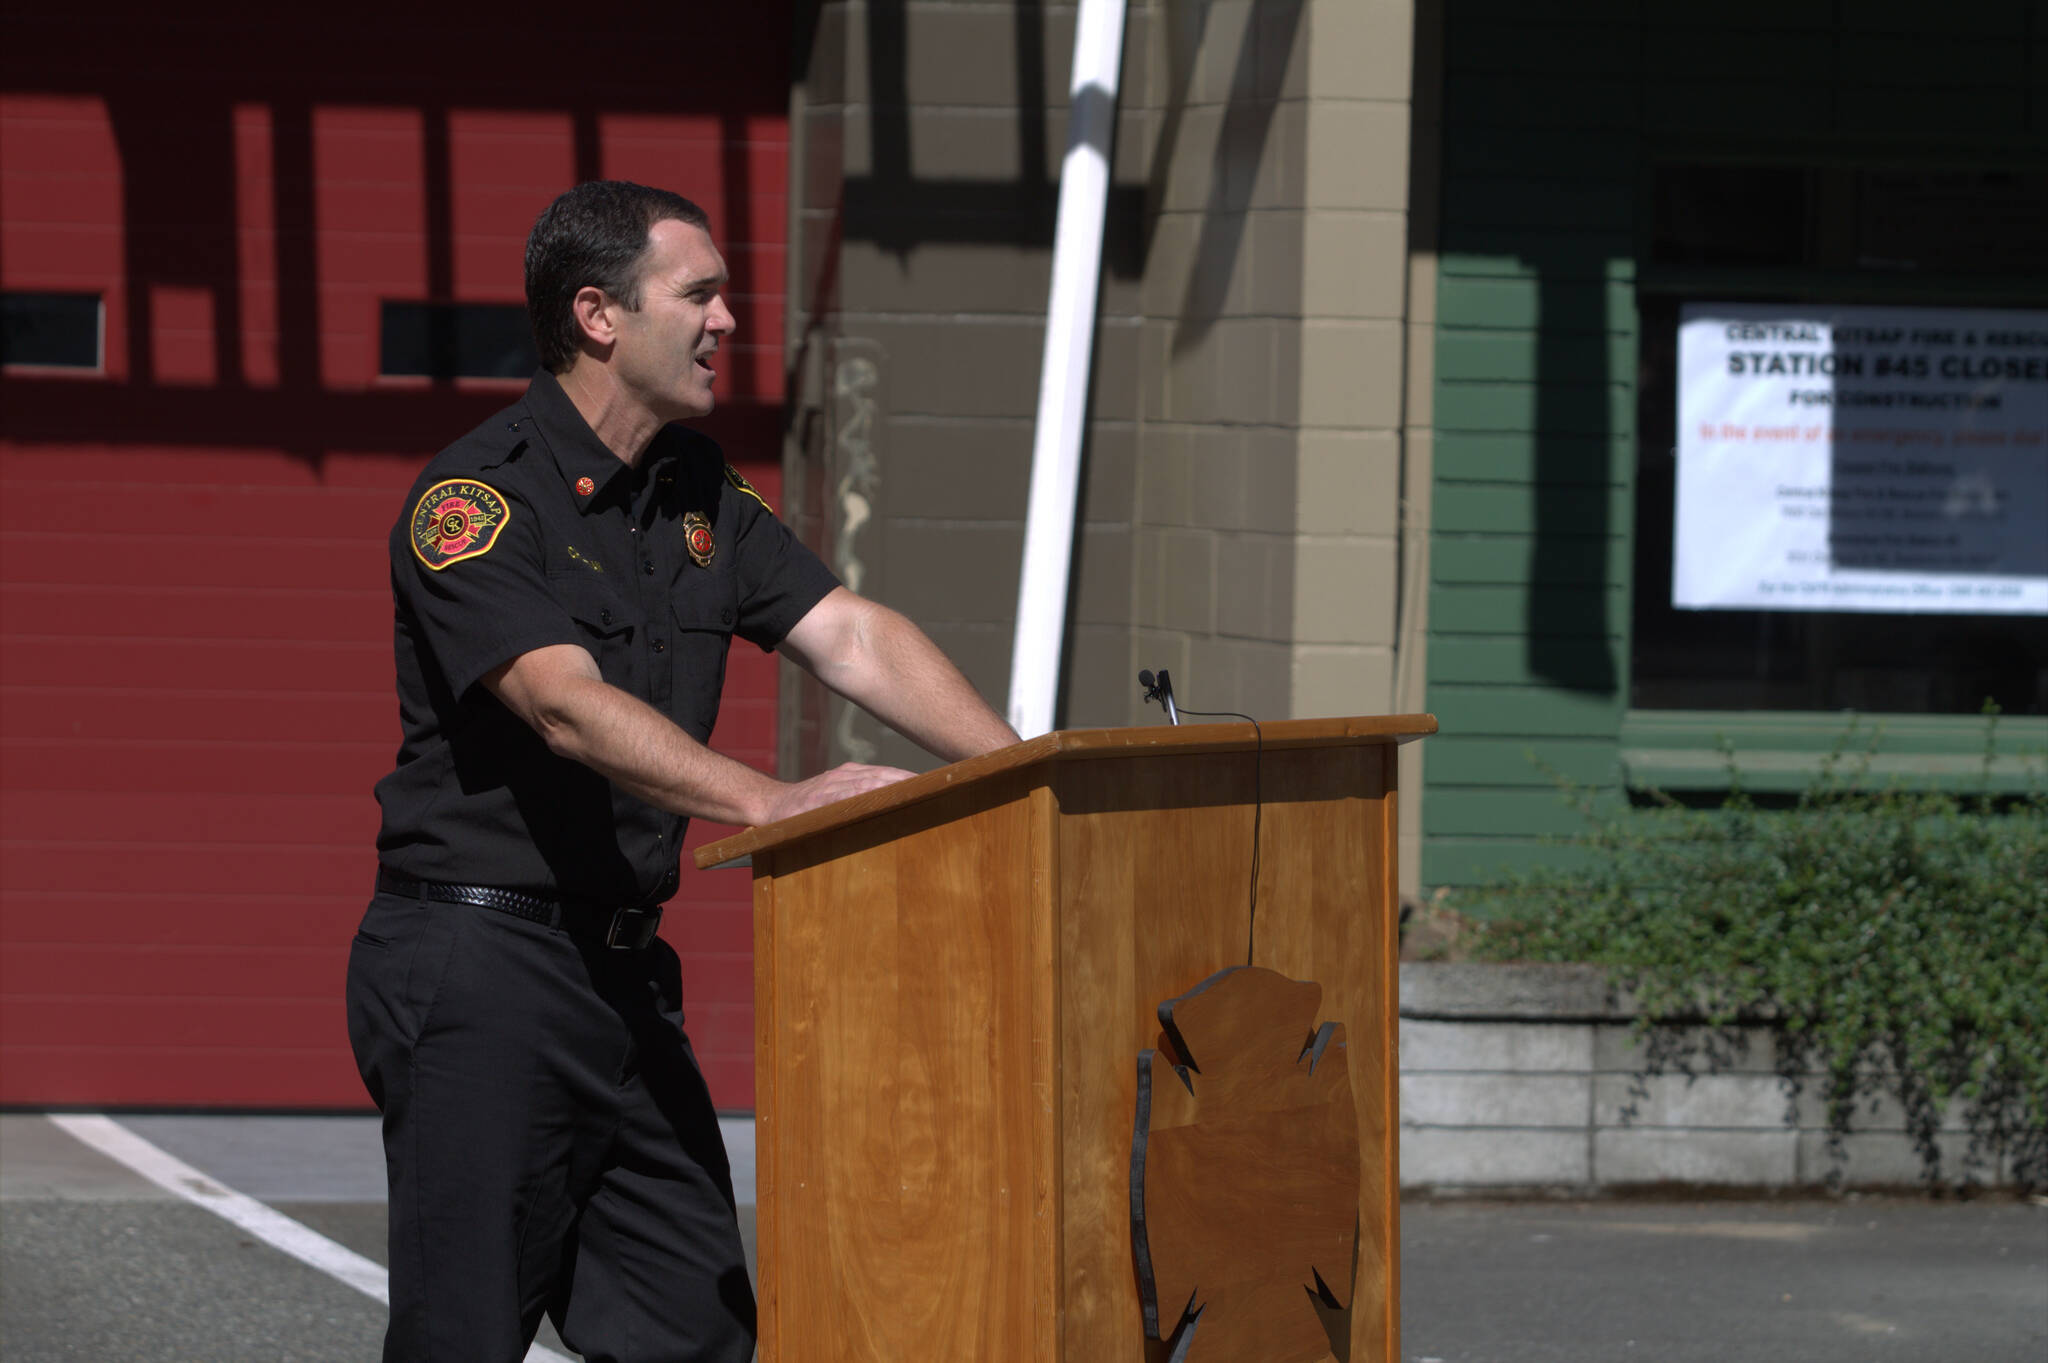 Courtesy photo
Fire Chief Jay Christian speaks to the camera in the recording of the ceremony video.